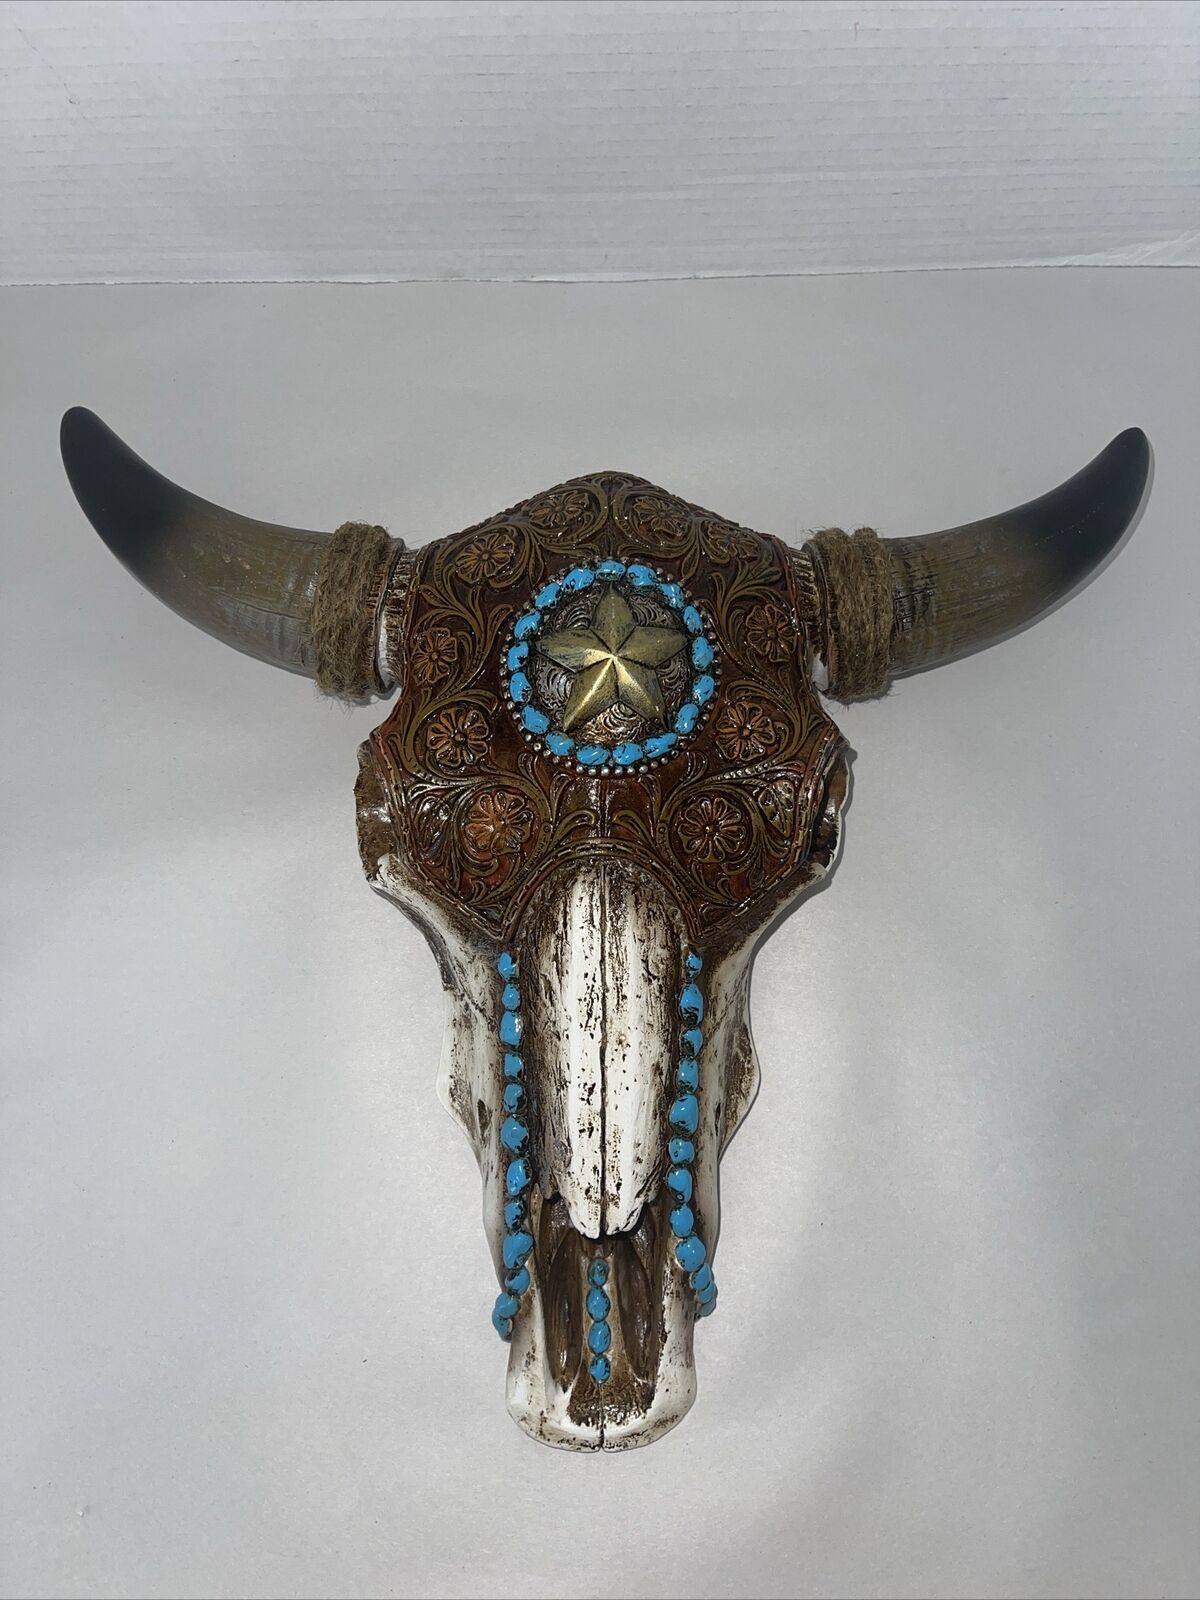 Steer Bison Skull Cow Aztec Sun Turquoise Mosaic Southwest Wall Decor 12x13x4”